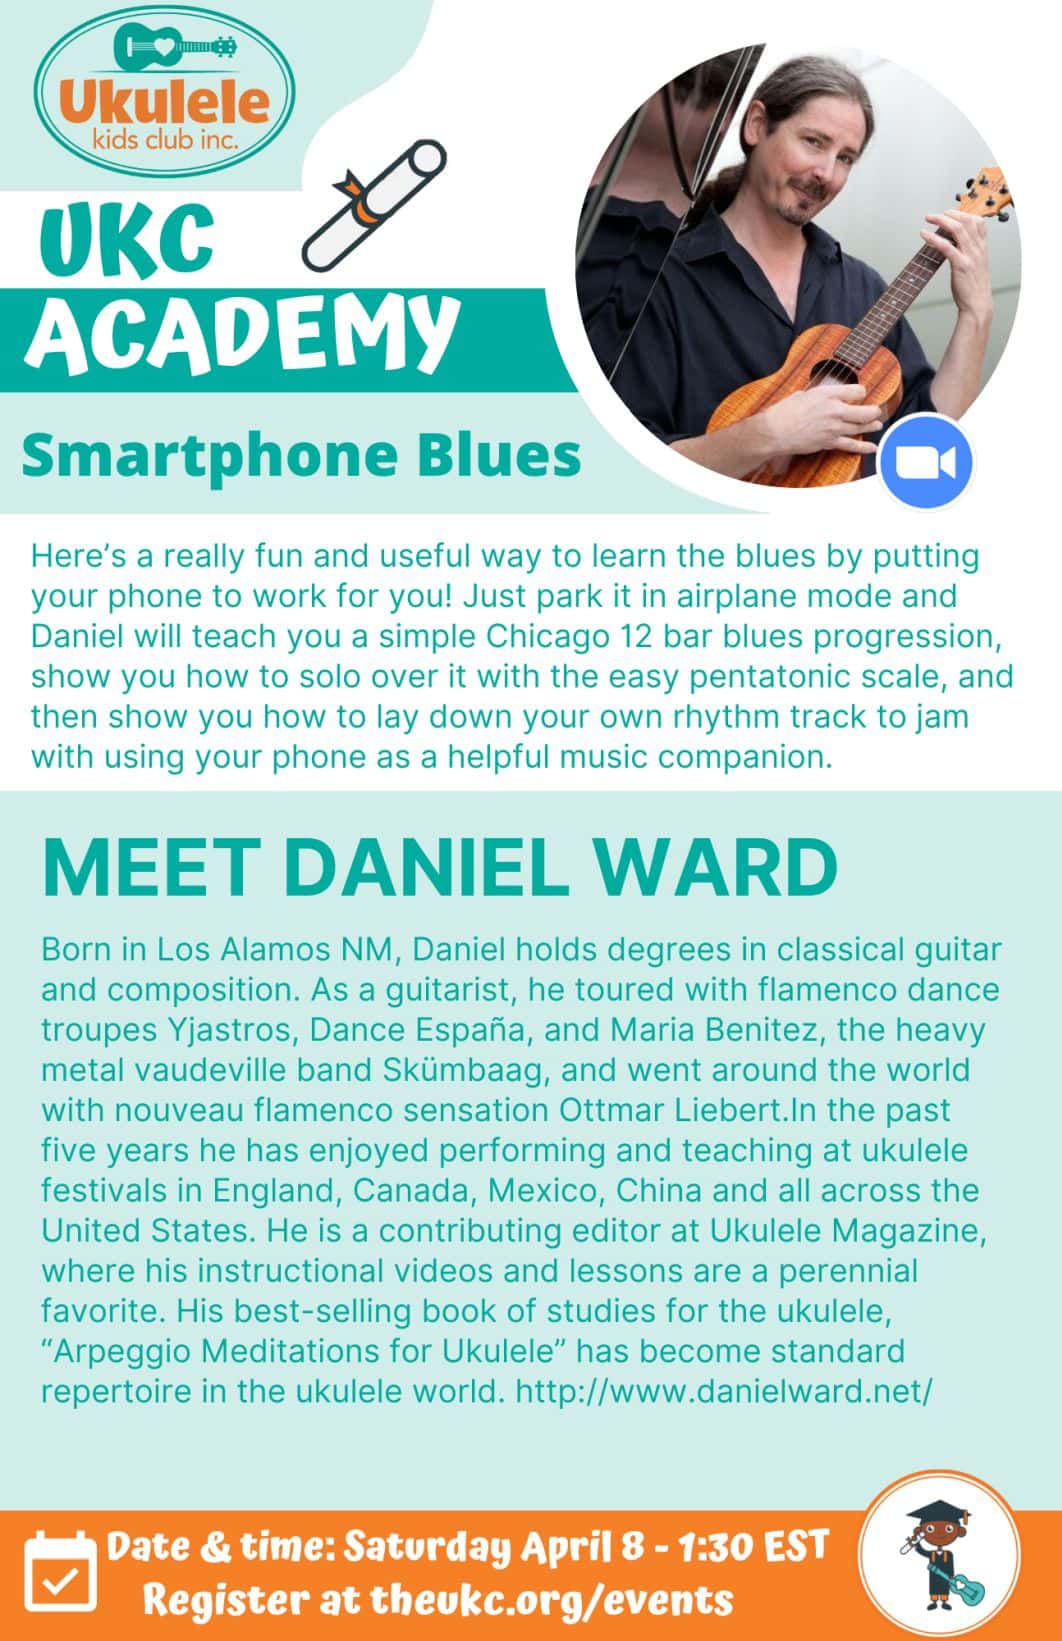 The event flyer features a photo of Daniel Ward holding his ukulele along with basic event details